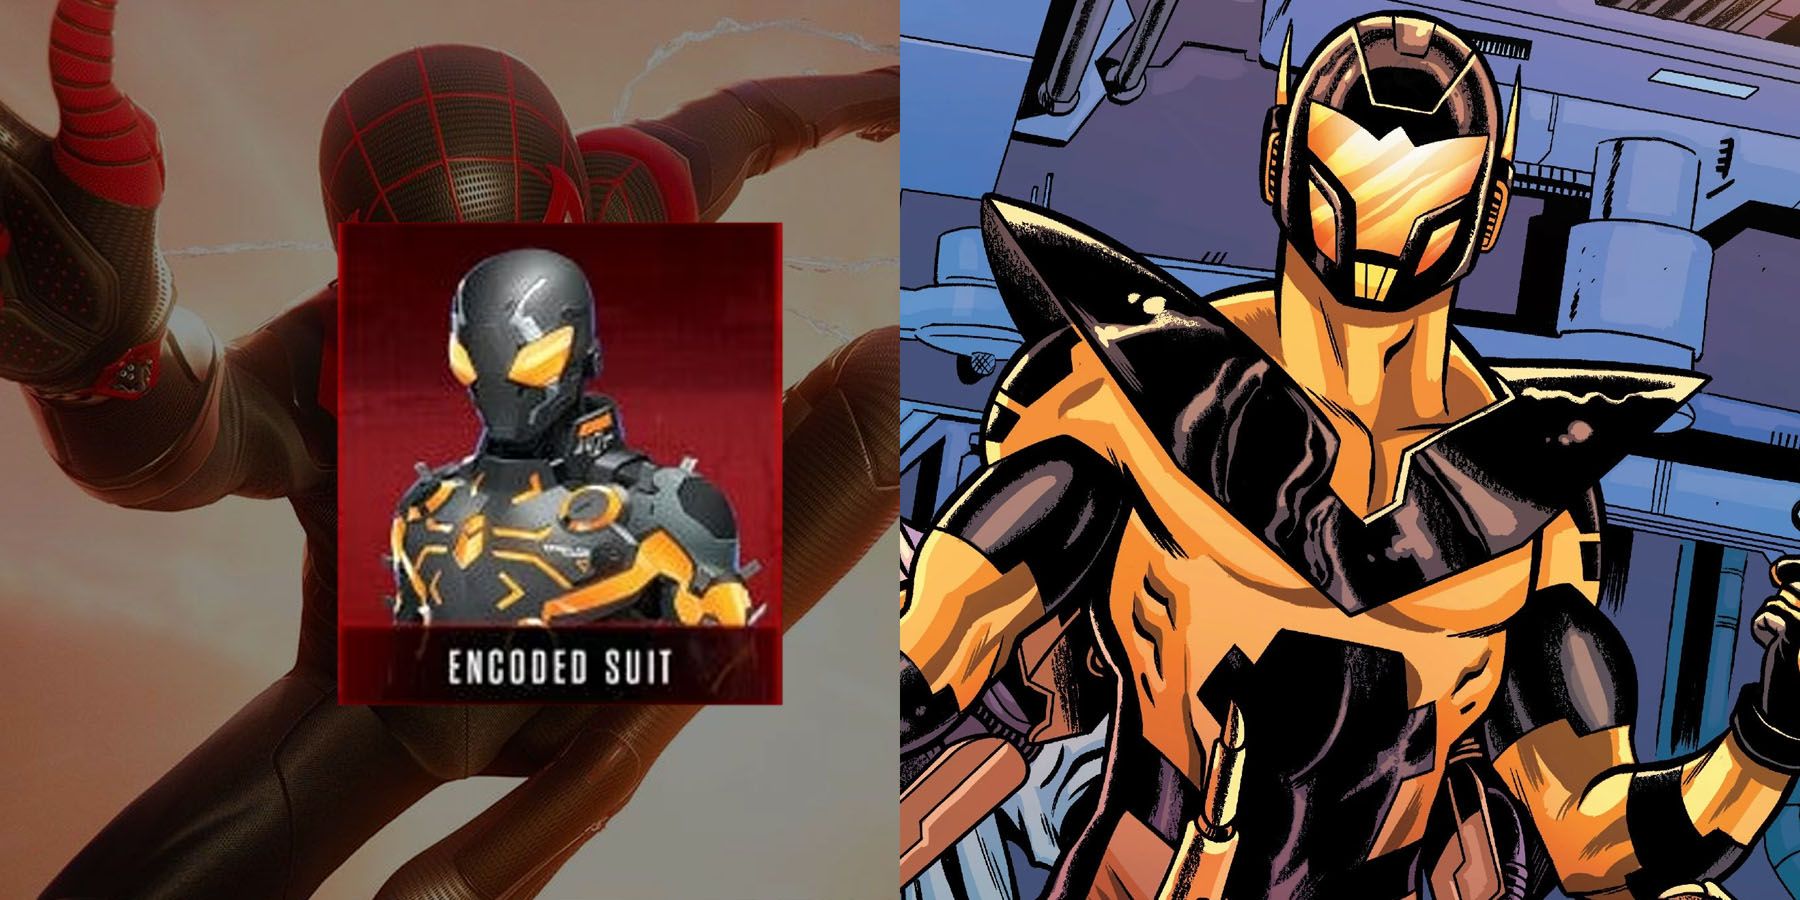 The spider-man mark 2 suit but the gold on the suit is replaced